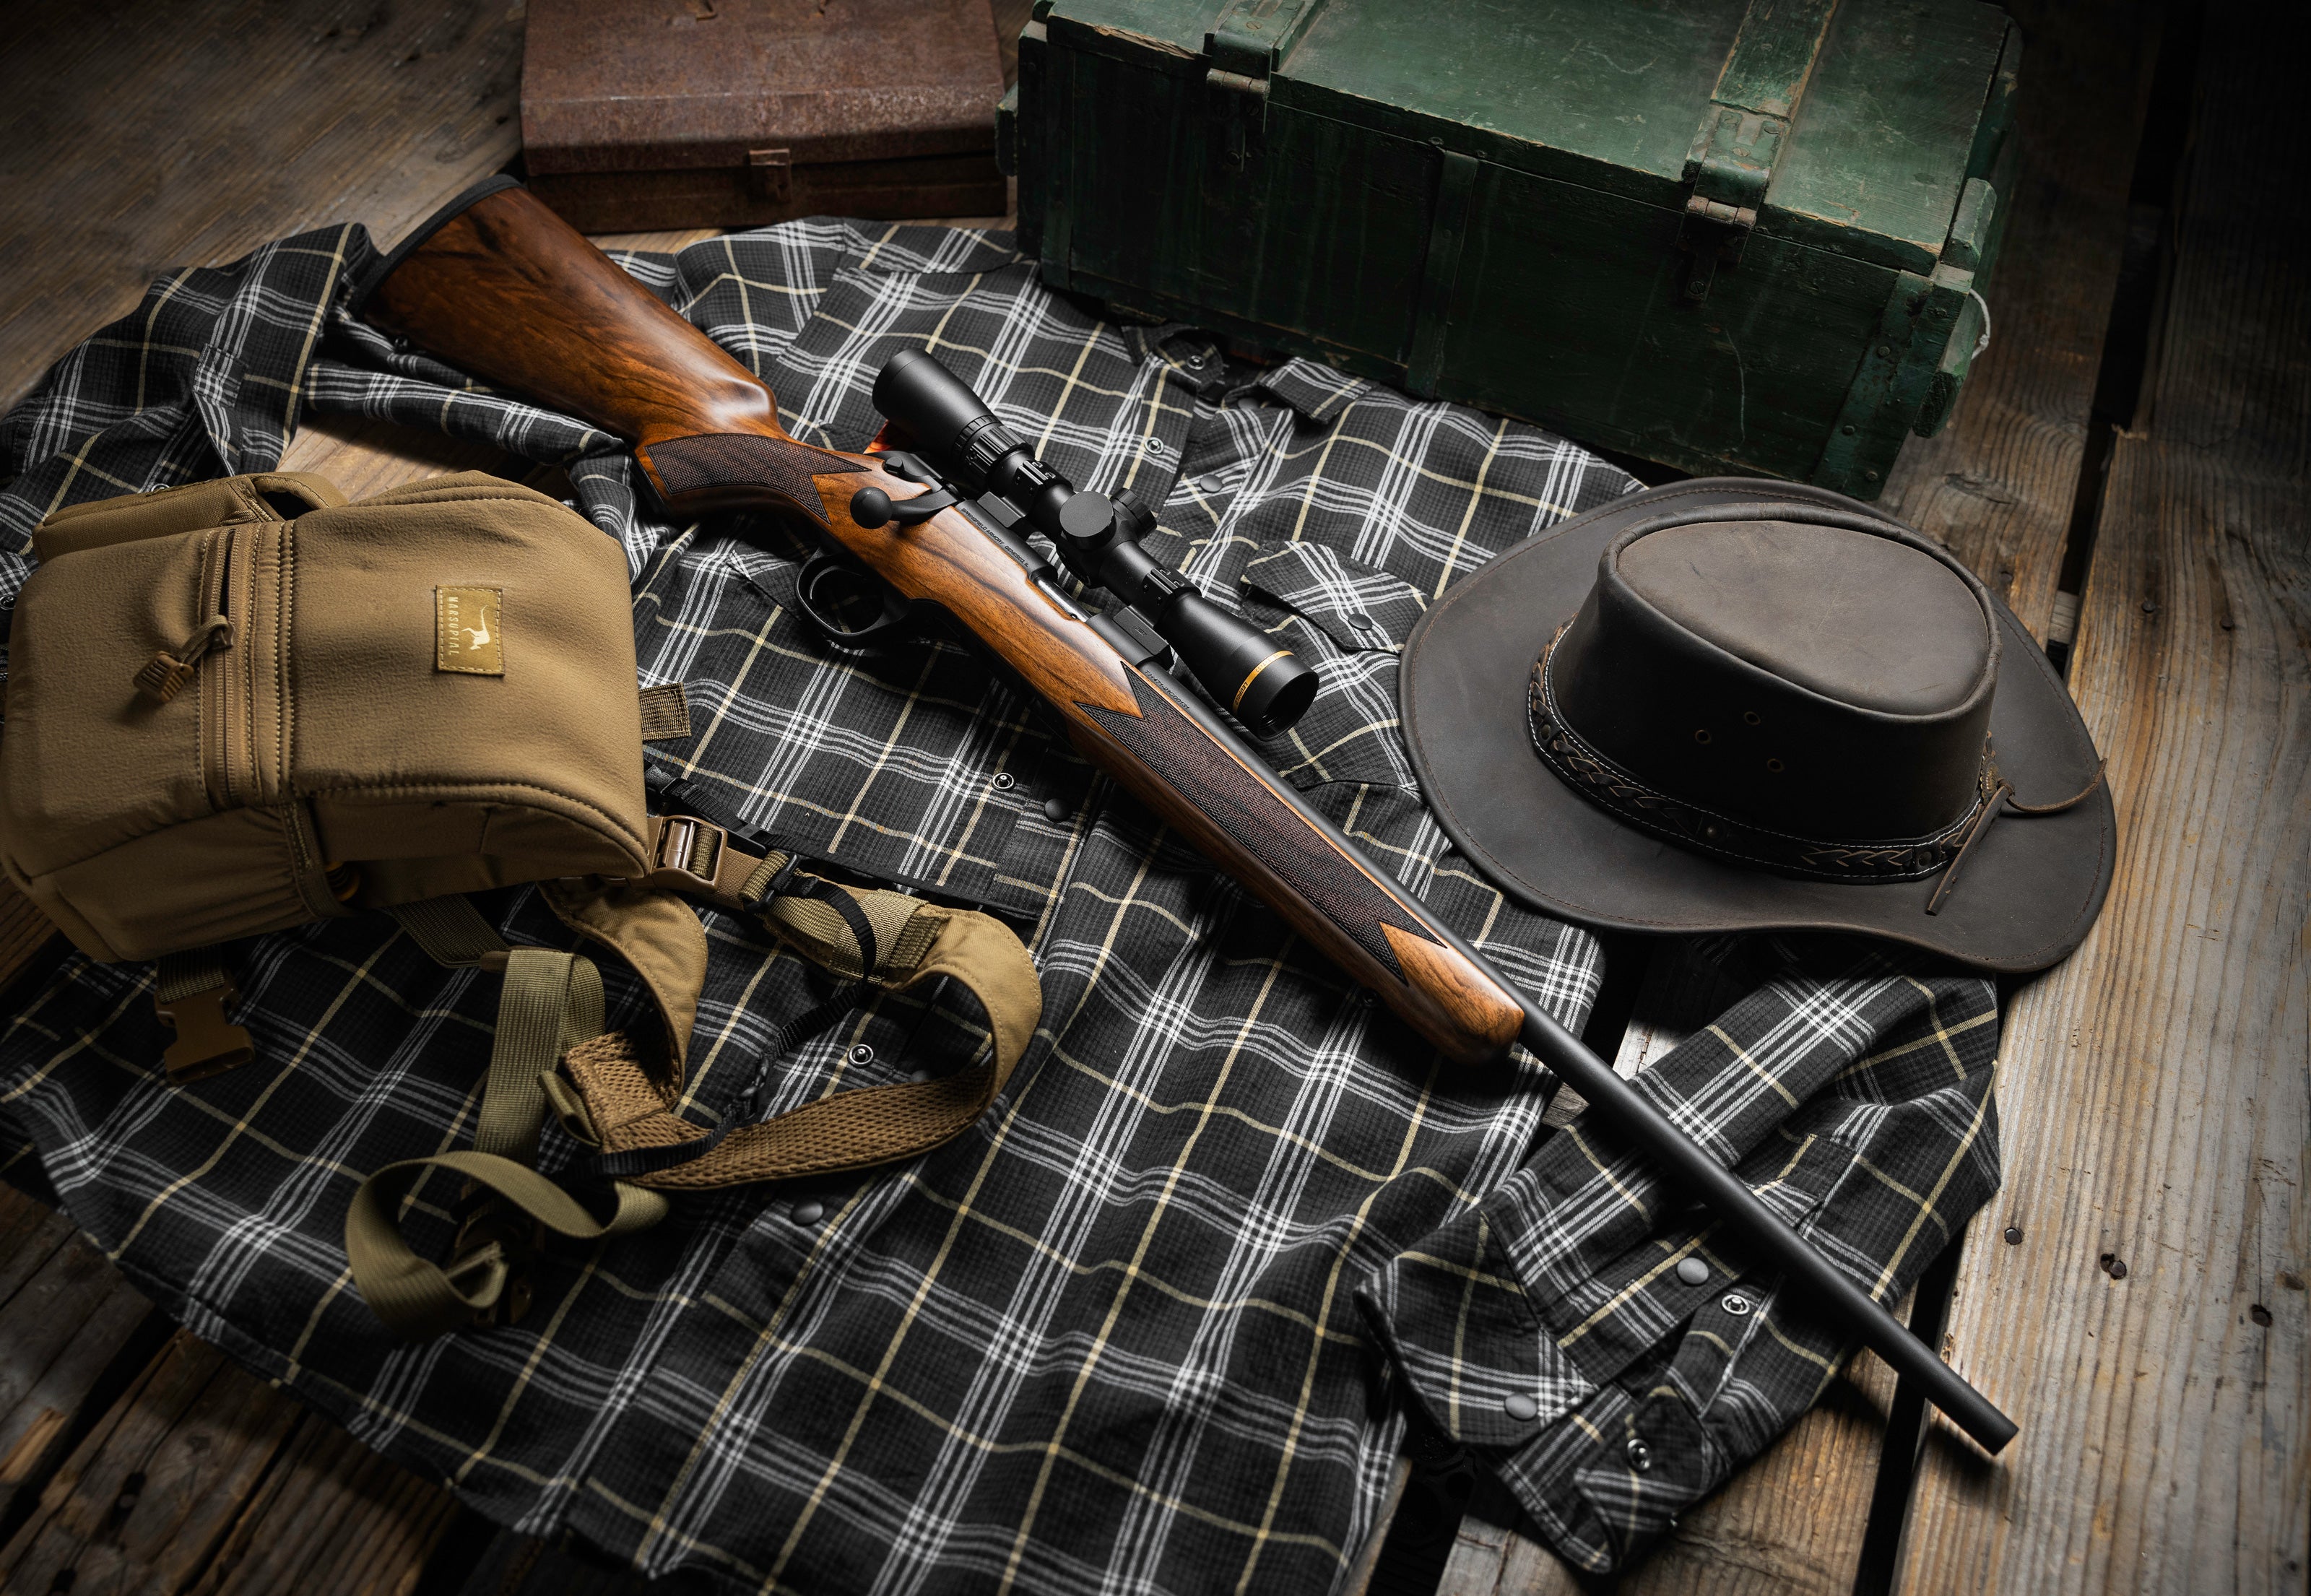 Introducing Springfield Armory's Latest: The Model 2020 Rimfire Rifles